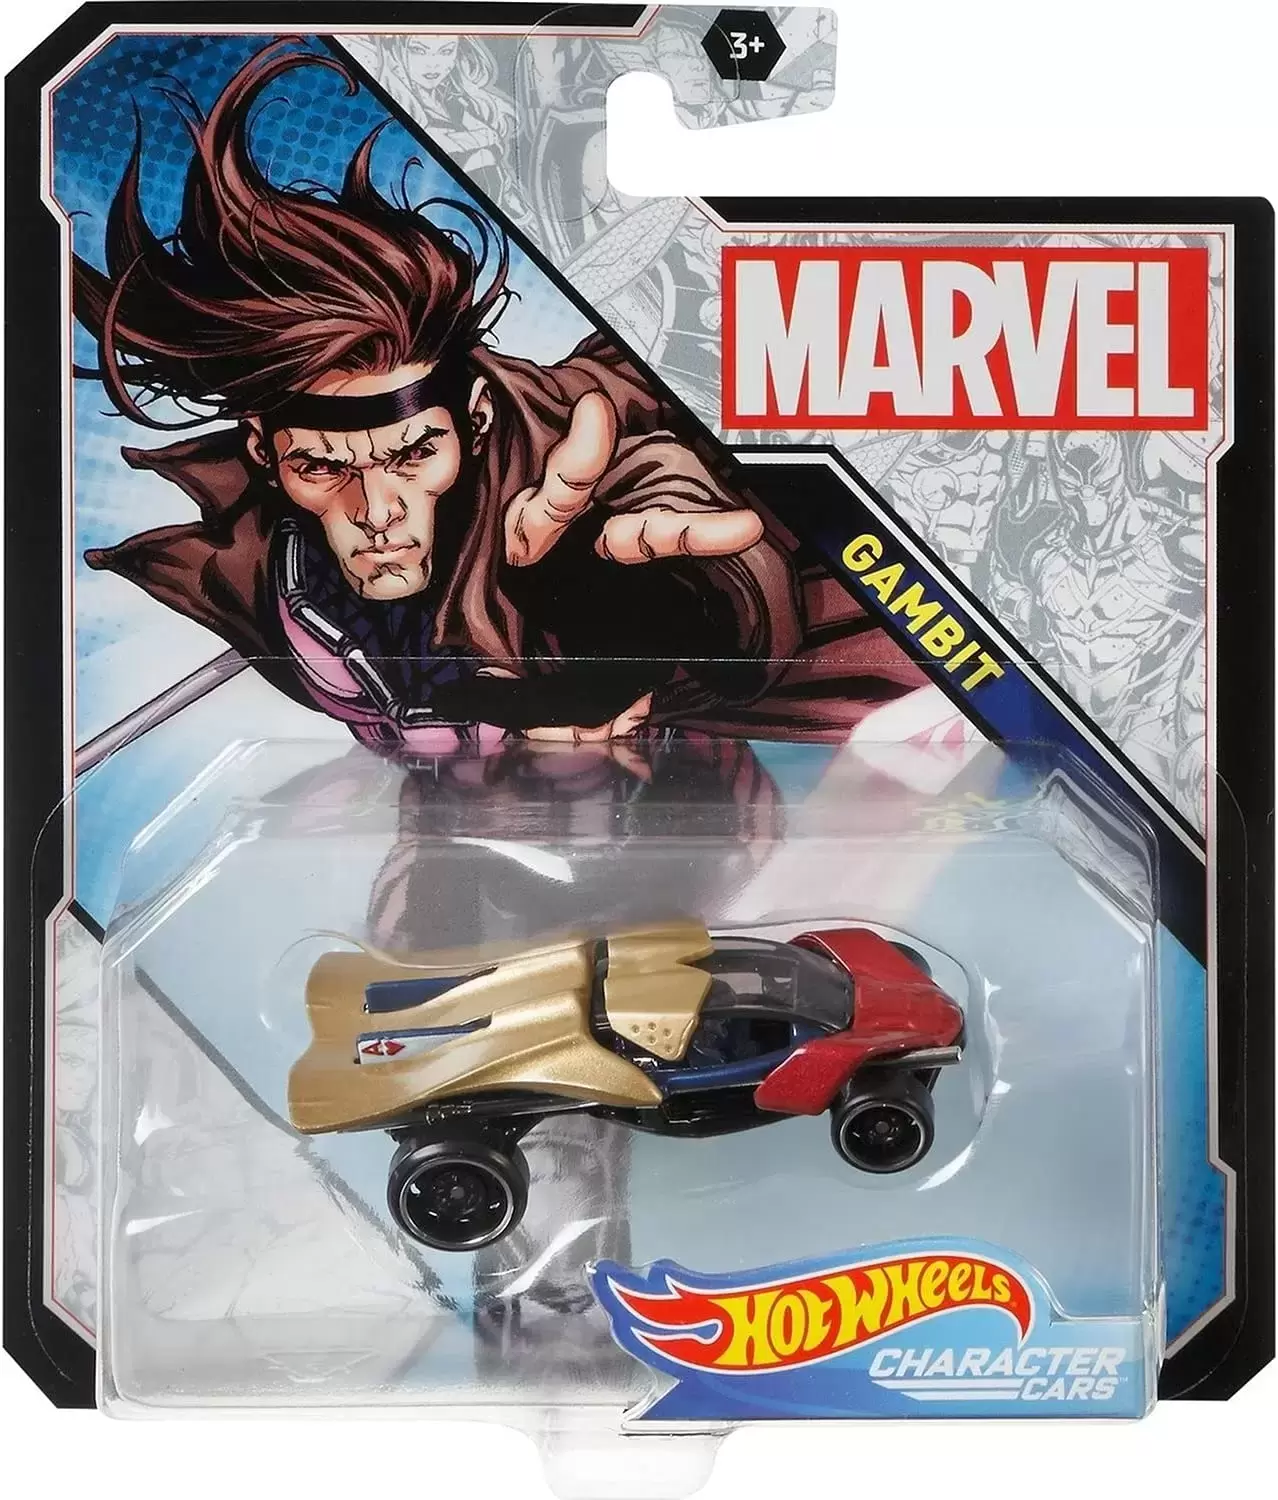 Marvel Character Cars - Gambit